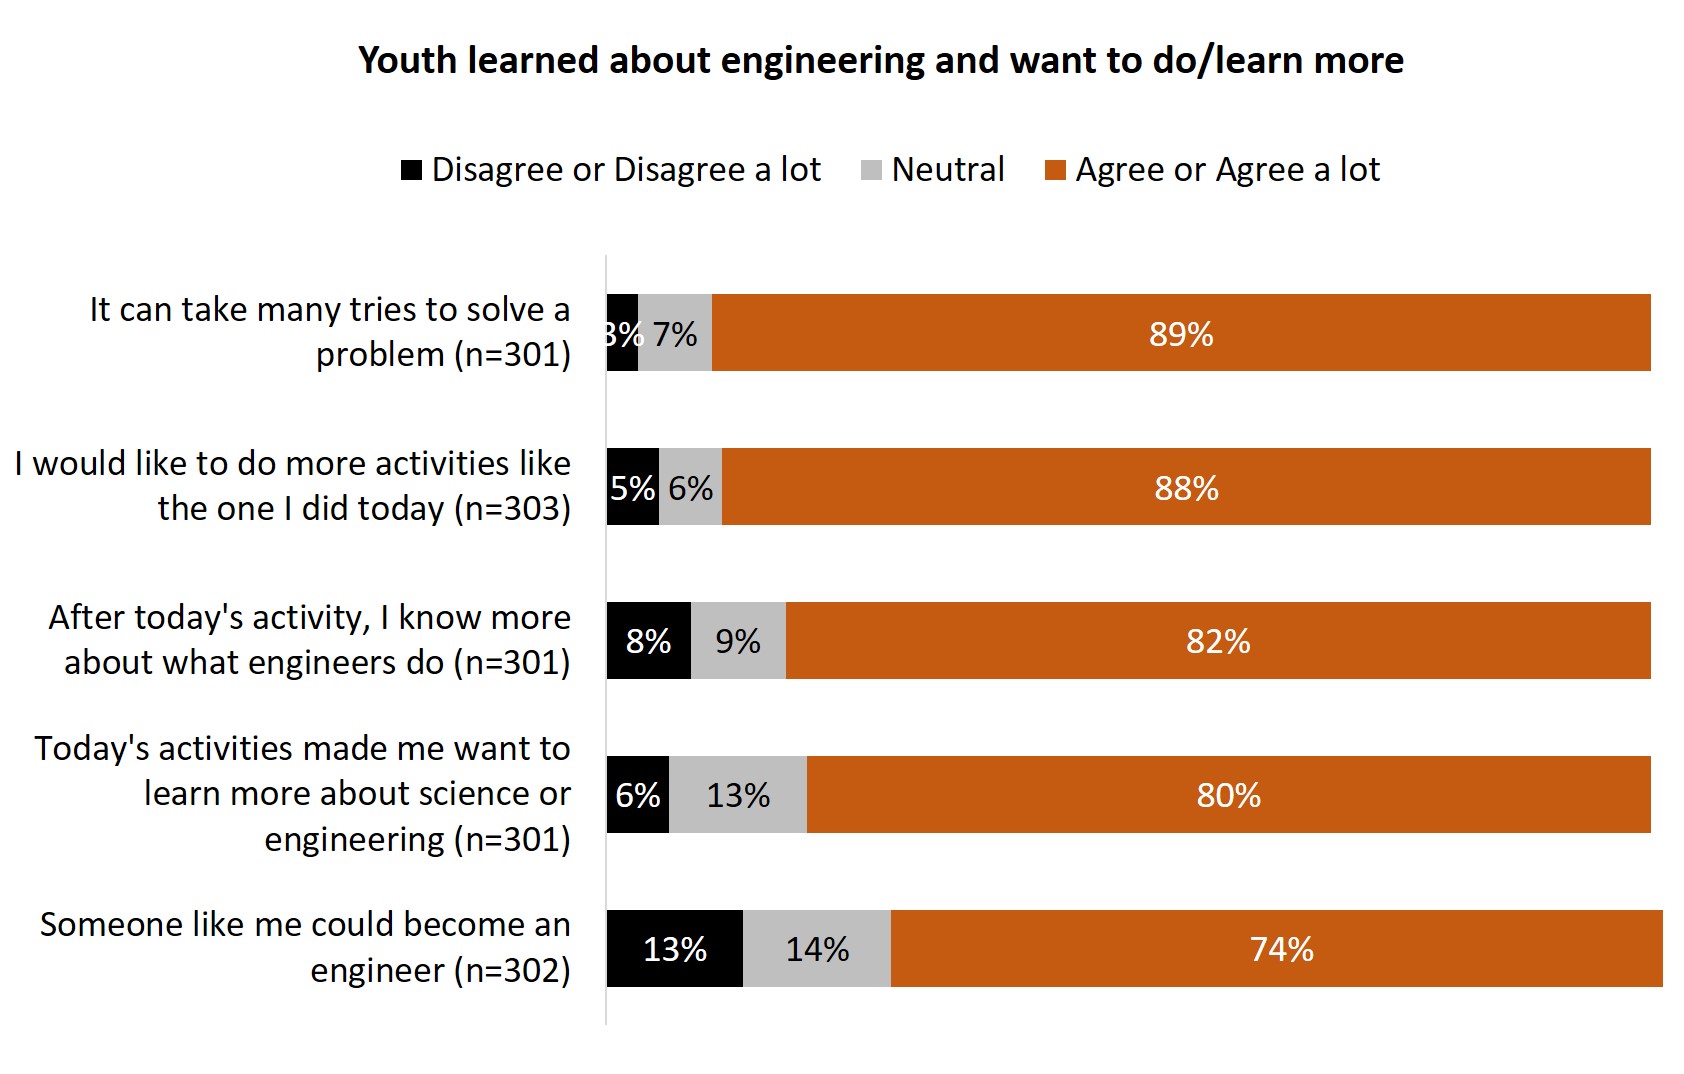 Figure 3: Survey results showing youth participants’ overall perceptions of engineering